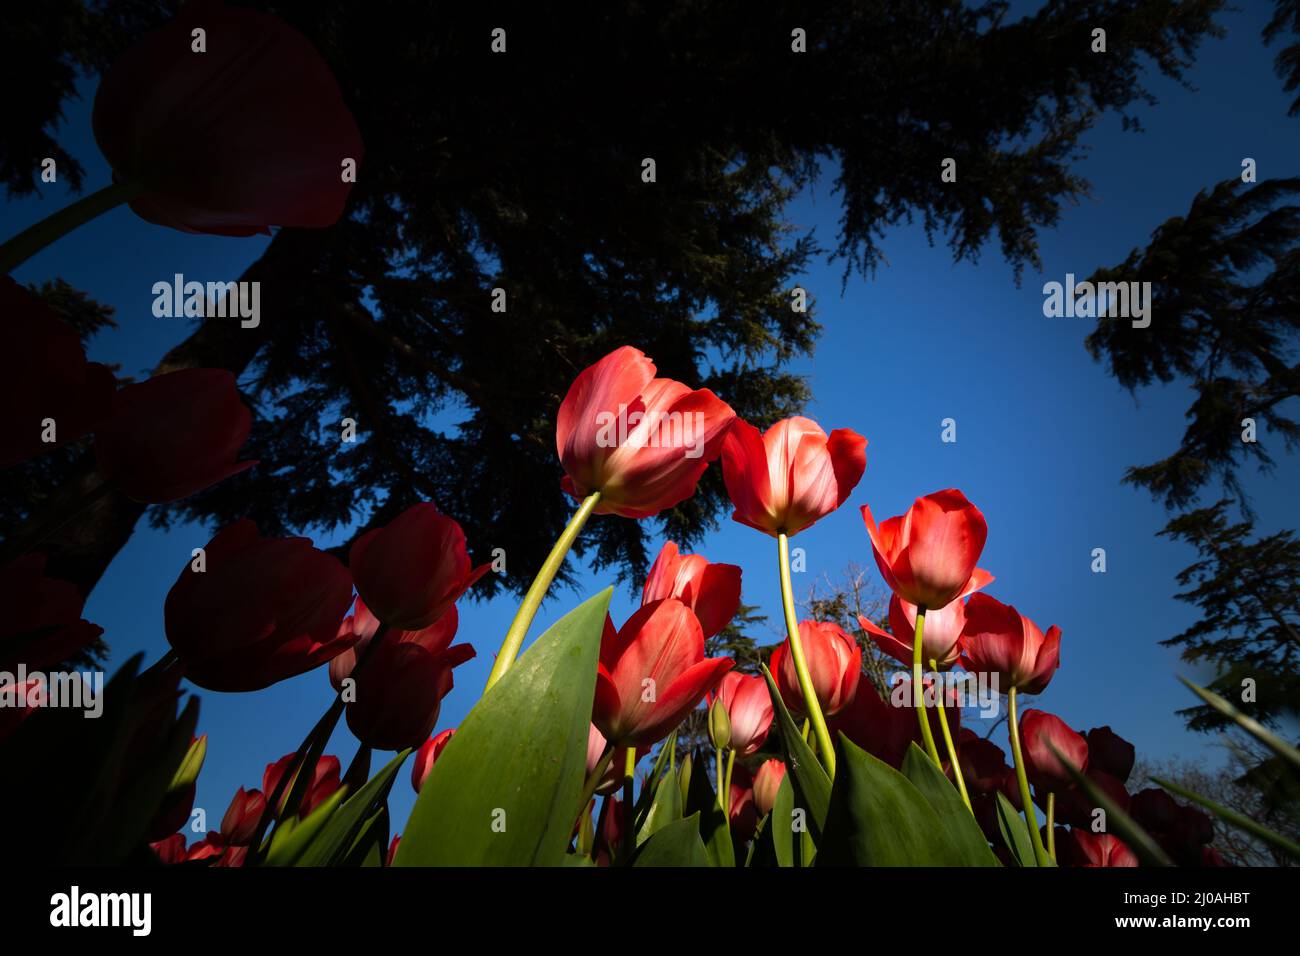 Tulip background photo. Low angle view of red tulips in the park in spring. Spring blossom background photo. Stock Photo